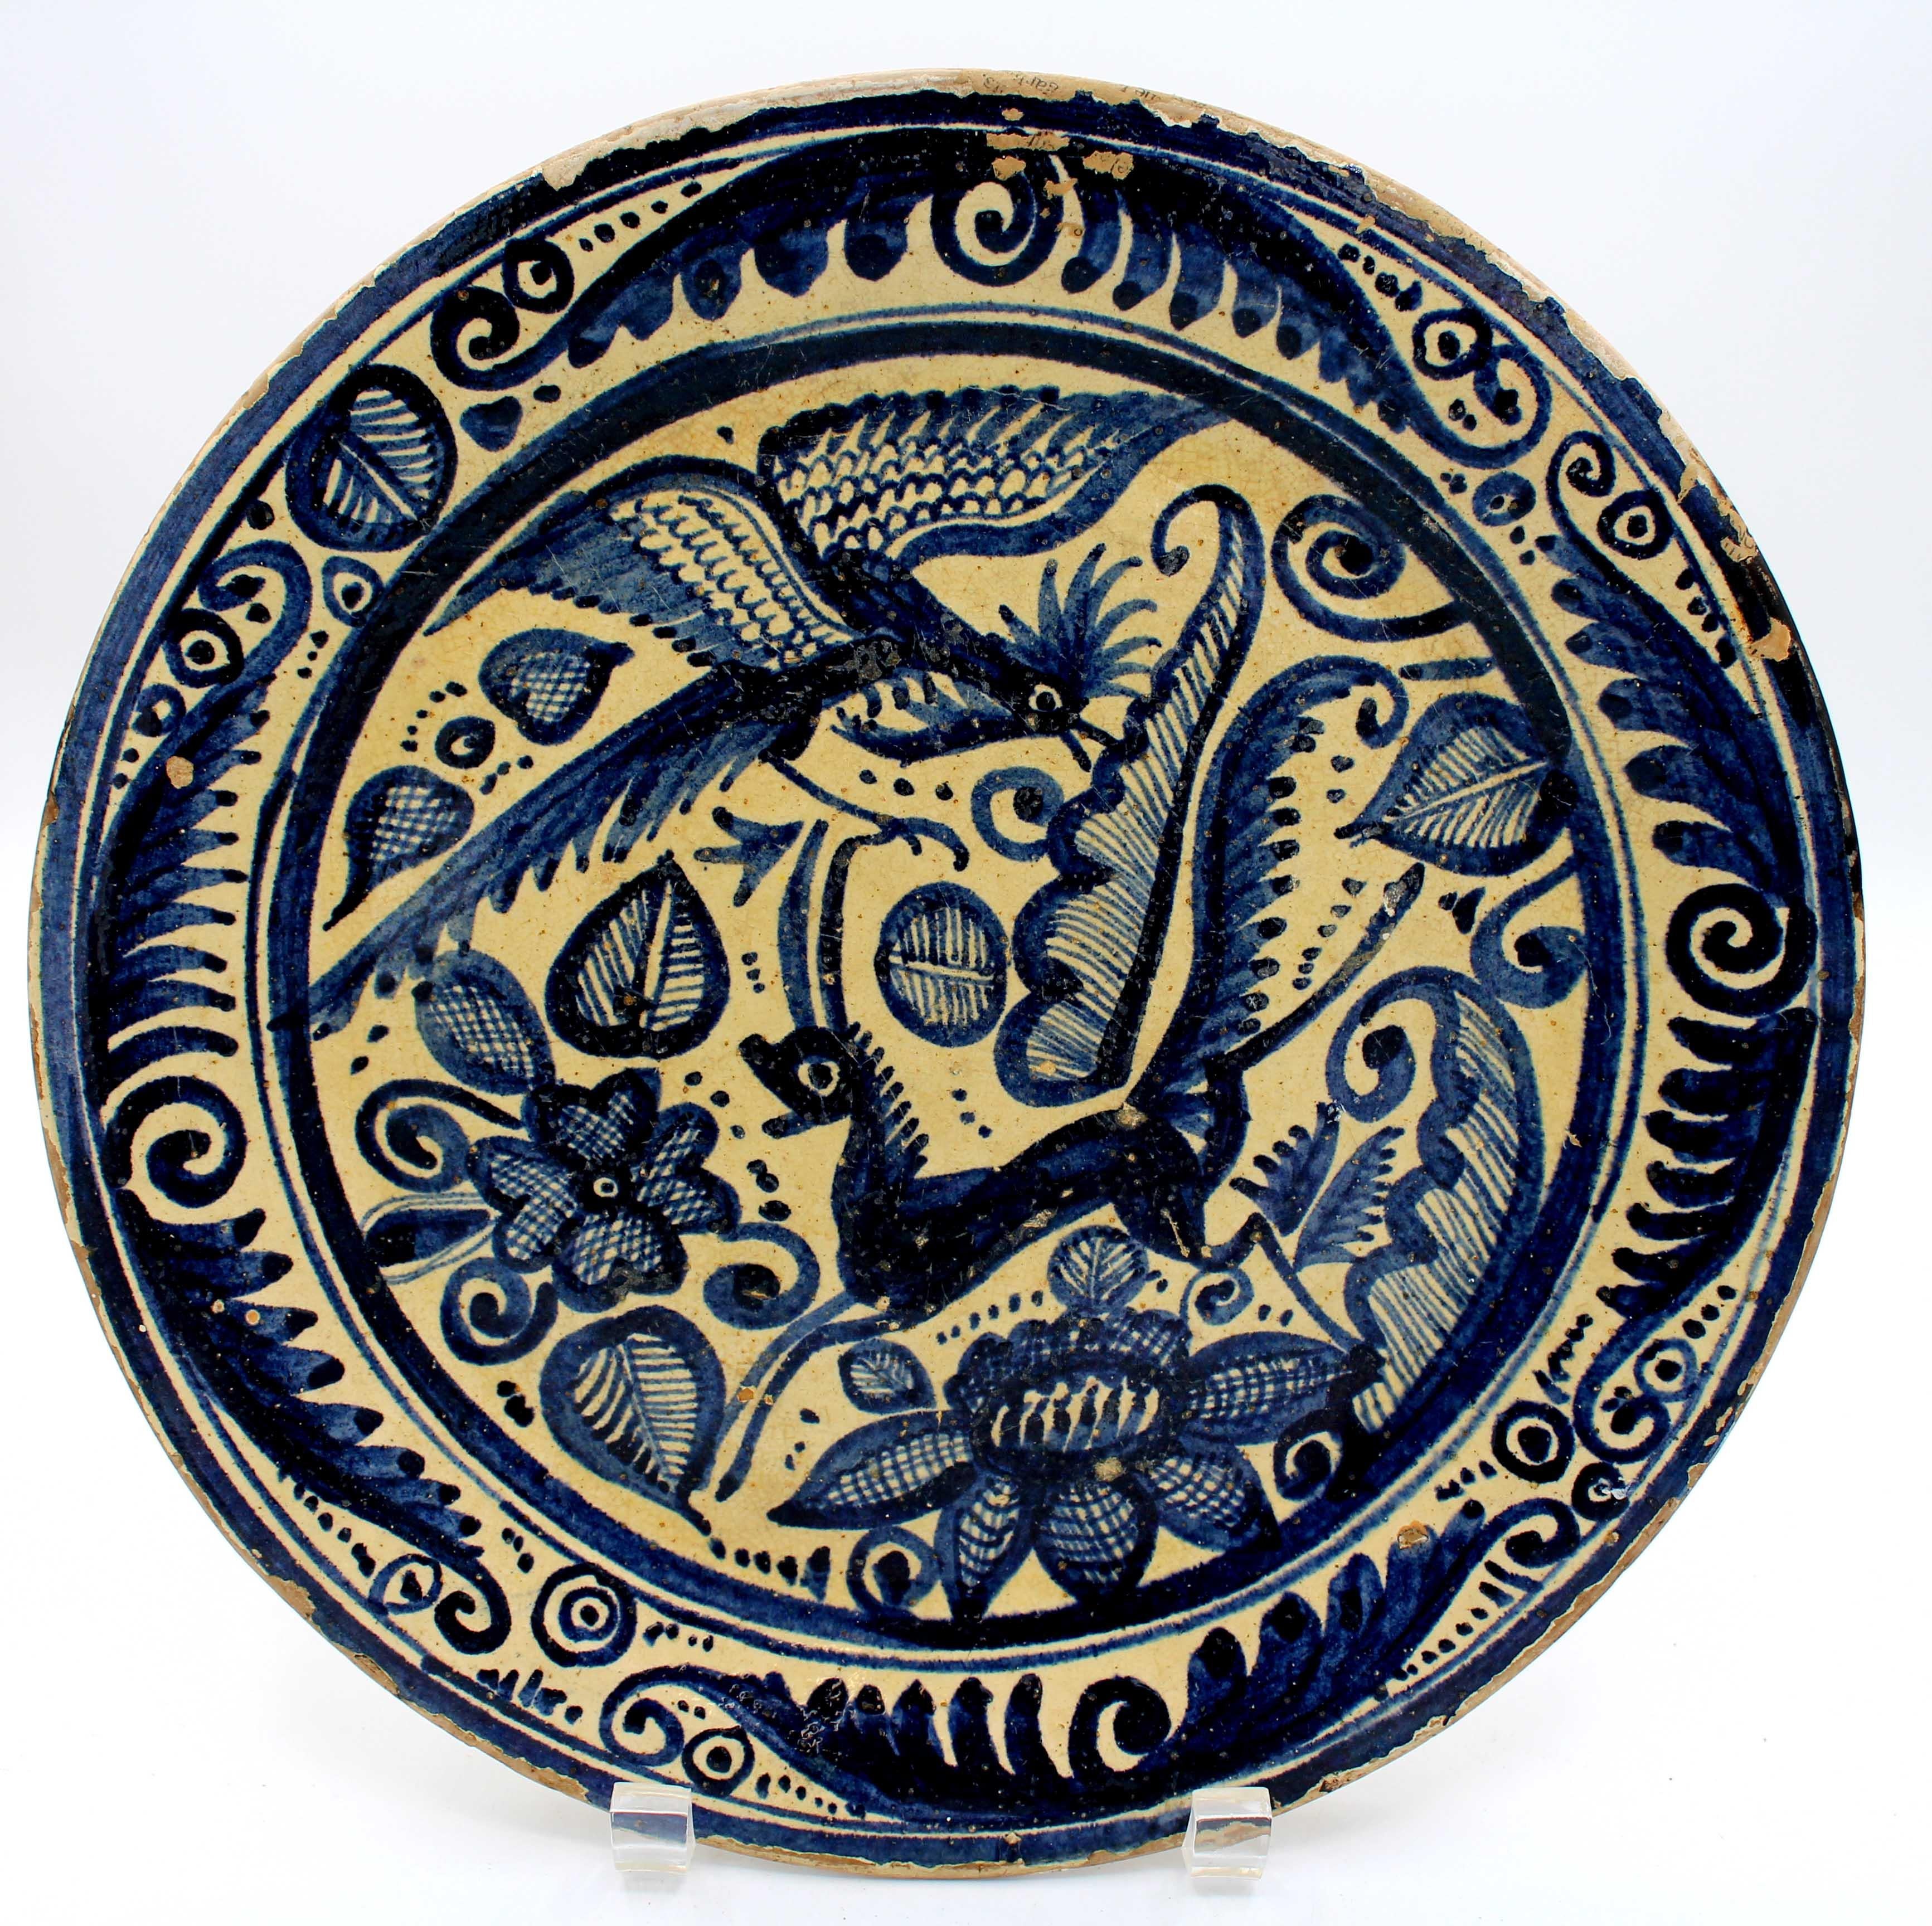 Mid-19th century tin glazed terracotta chop plate, likely Spanish. Blue & cream glazing with a fanciful bird & antelope. Edges heavily flaked. Provenance: Estate of Katherine Reid, former Director of the Cleveland Museum of Art. 11 9/16